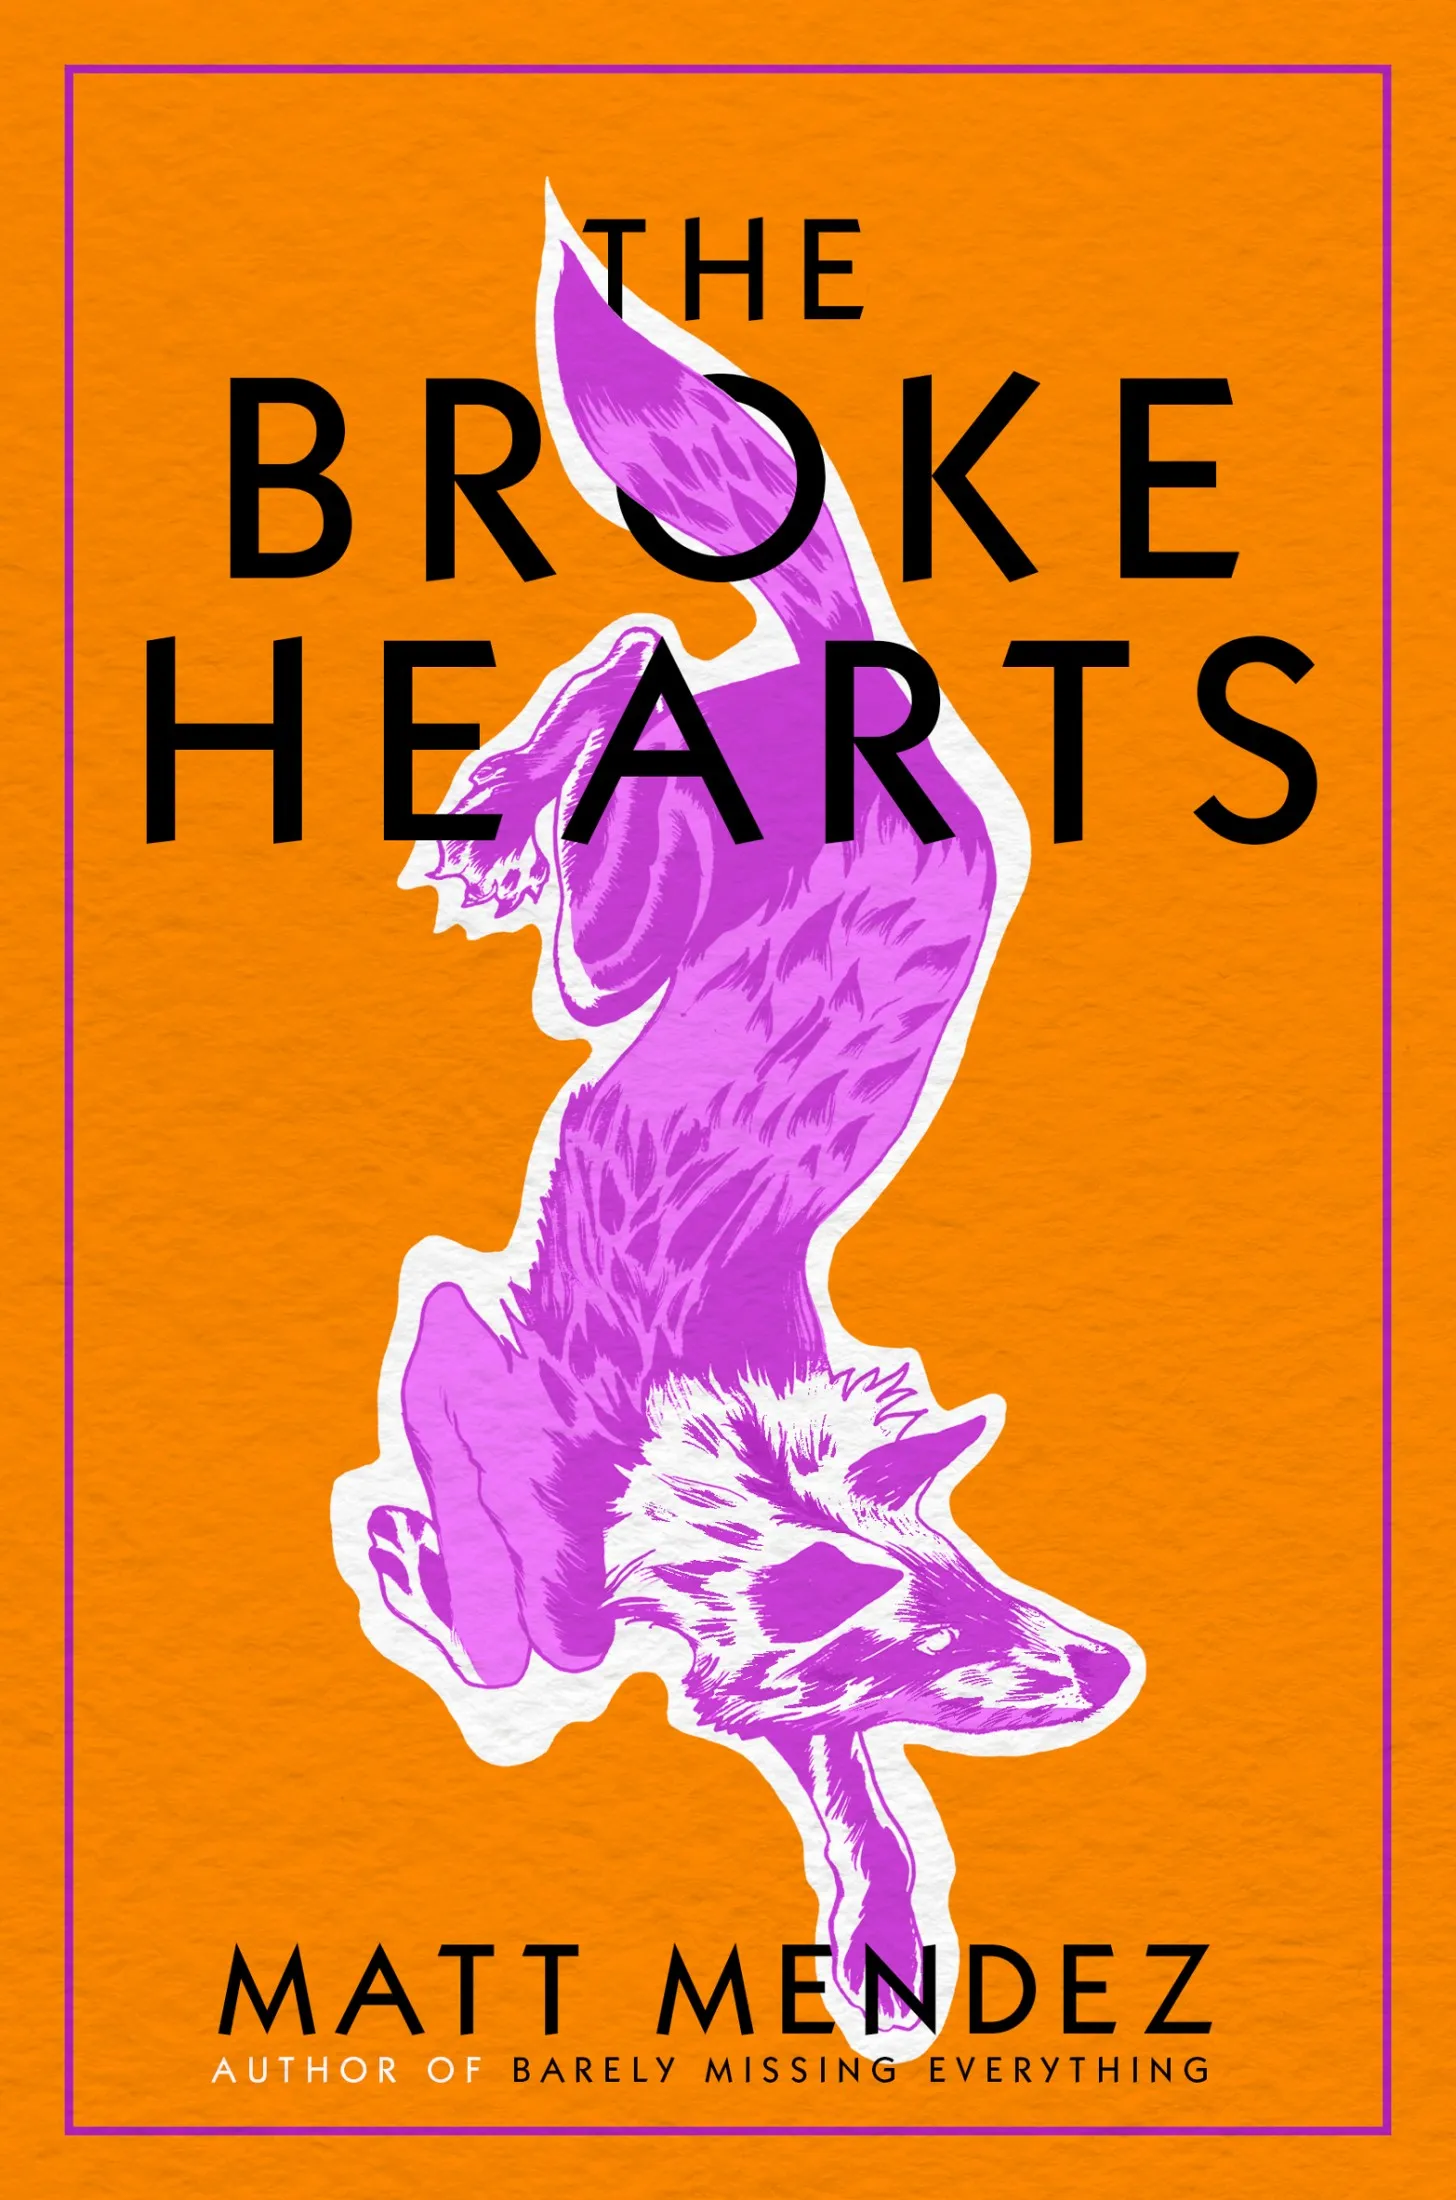 The Broke Hearts (Barely Missing Everything #2)